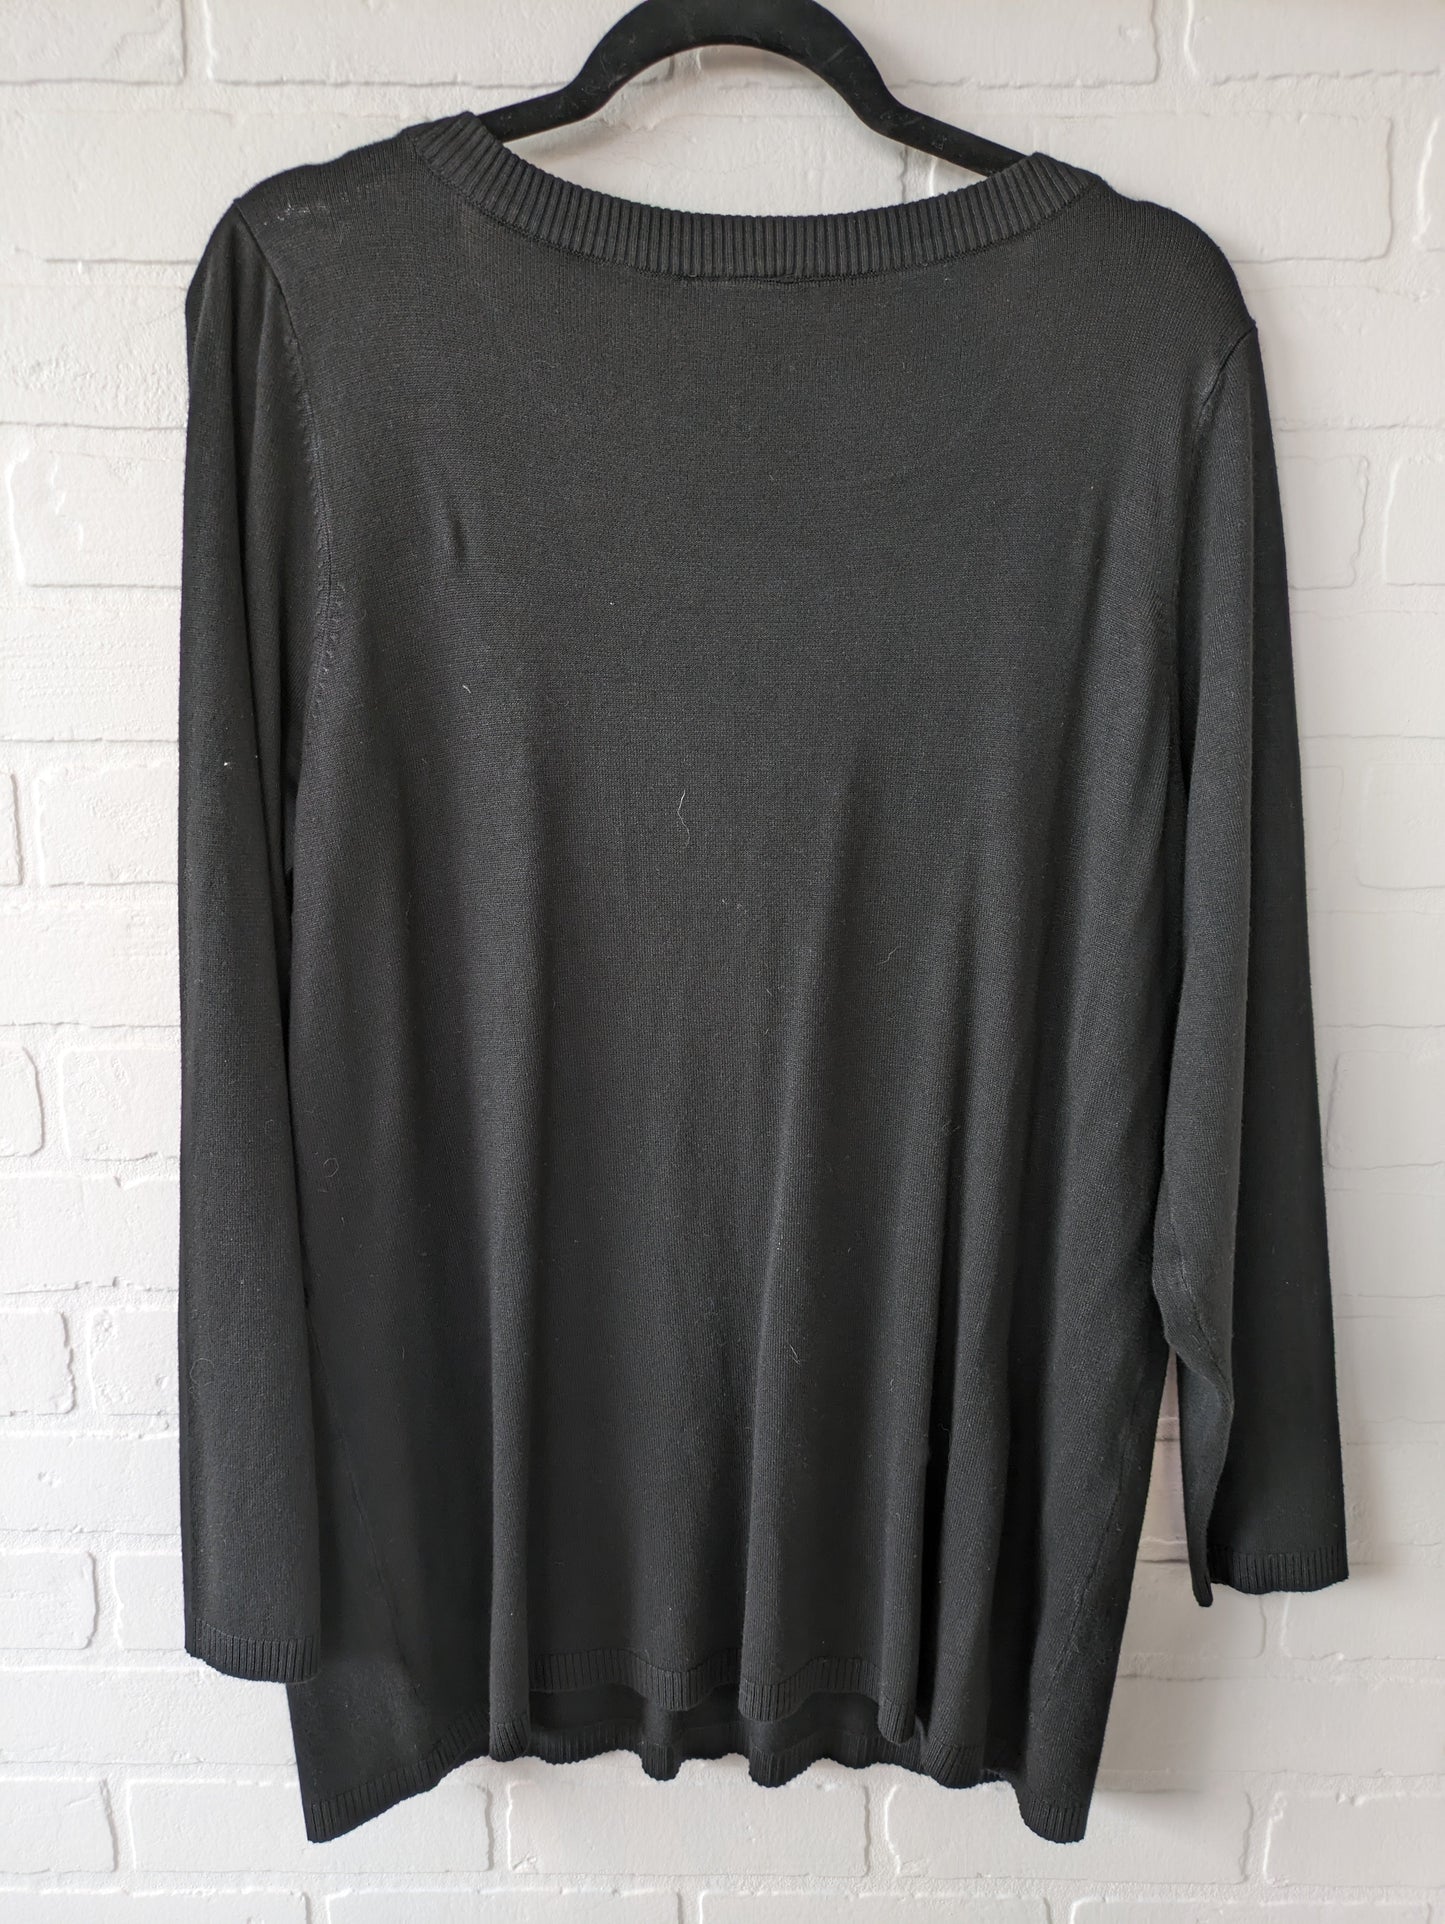 Sweater By Torrid  Size: 2x